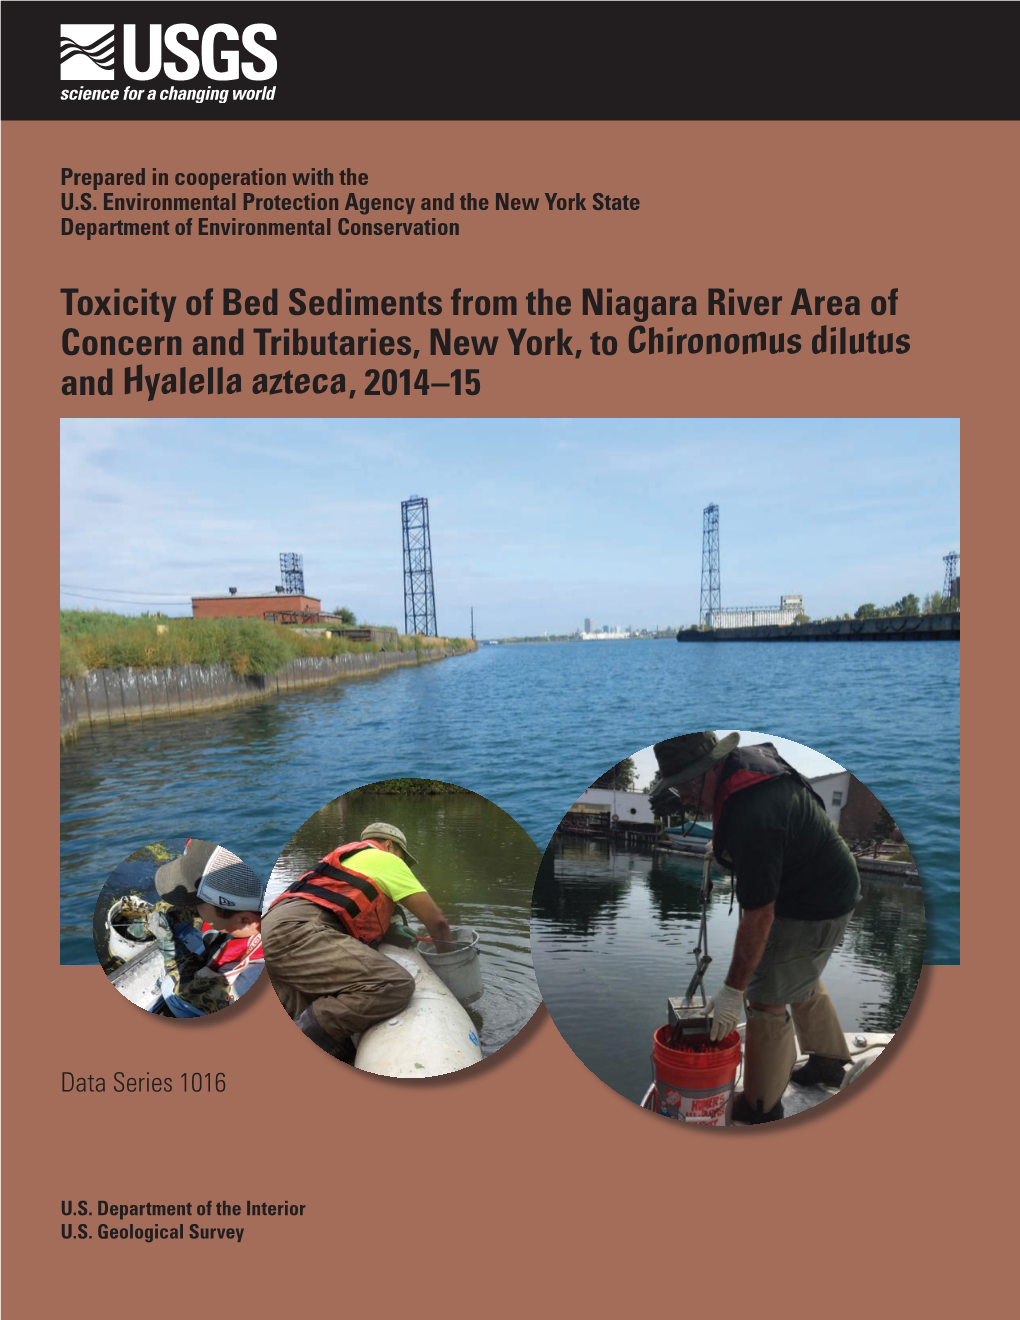 Toxicity of Bed Sediments from the Niagara River Area of Concern and Tributaries, New York, to Chironomus Dilutus and Hyalella Azteca, 2014–15